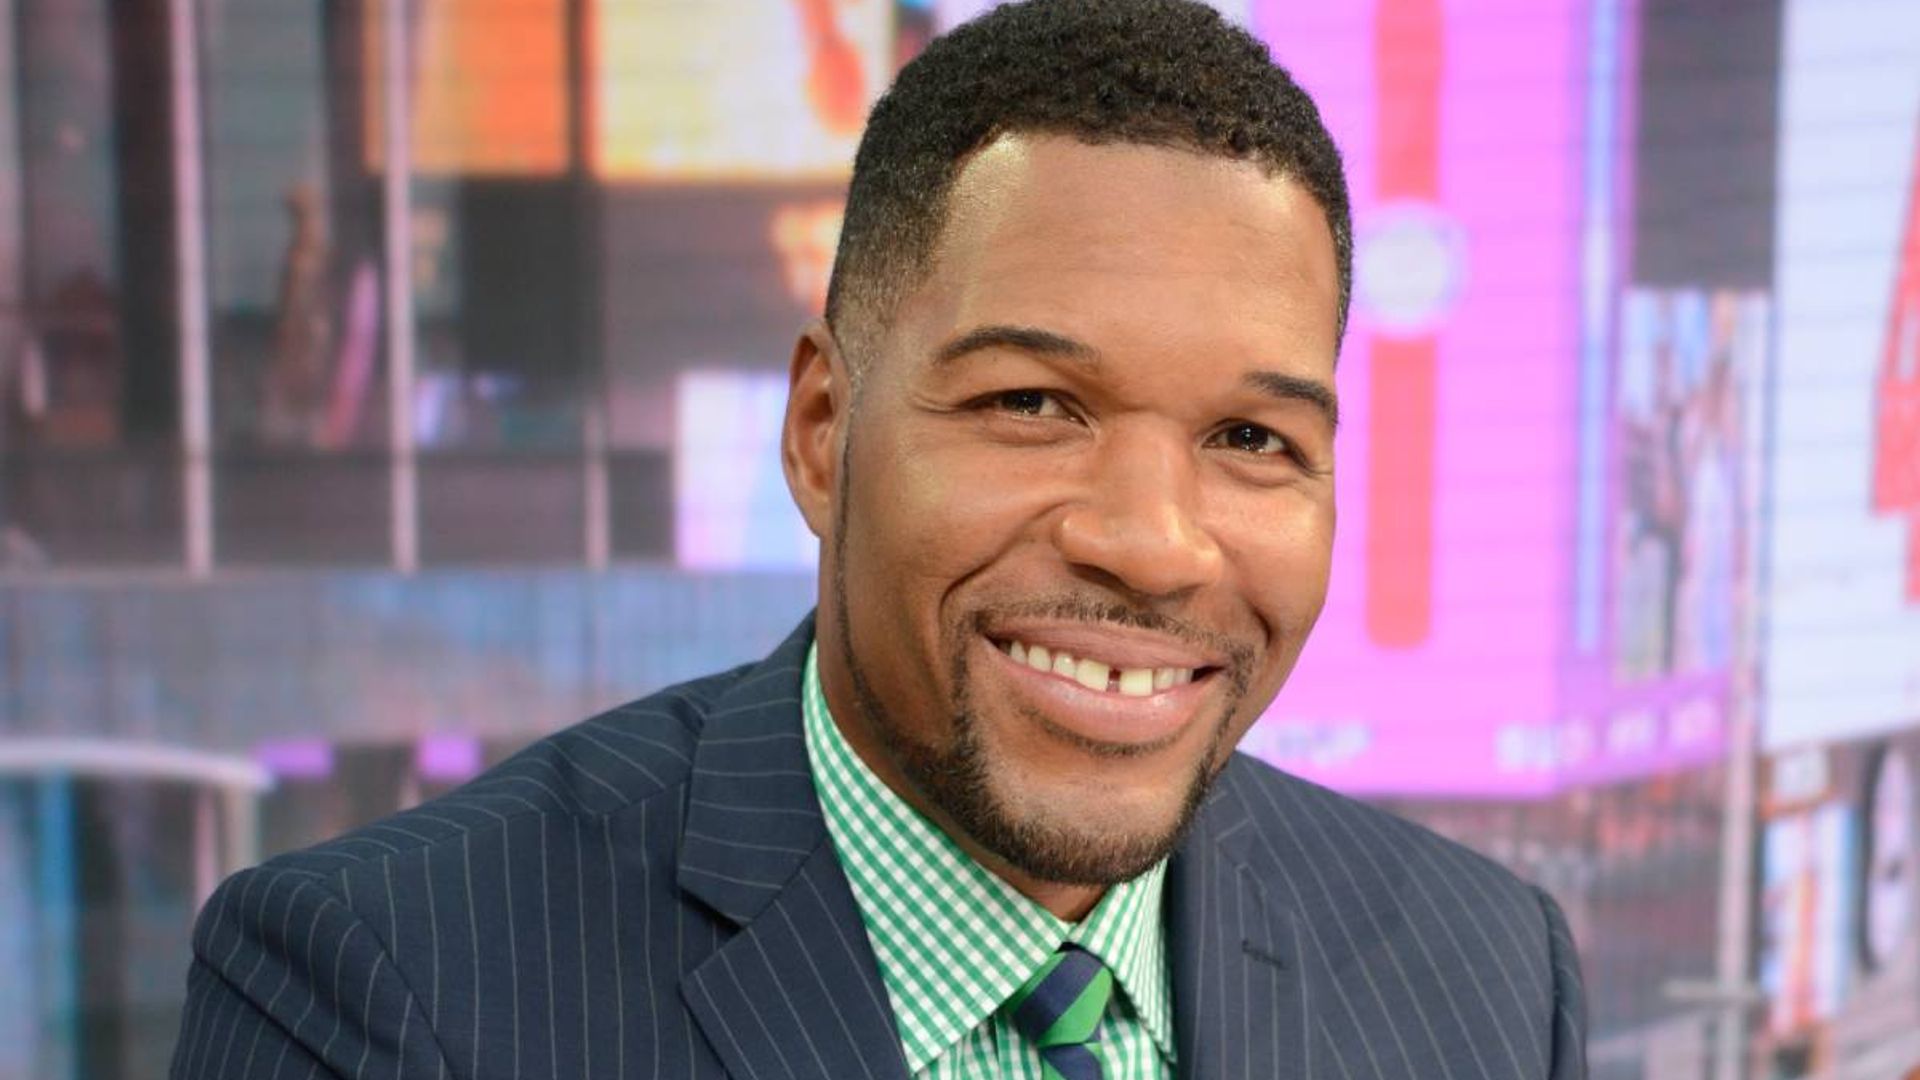 gma michael strahan inundated with support away from work